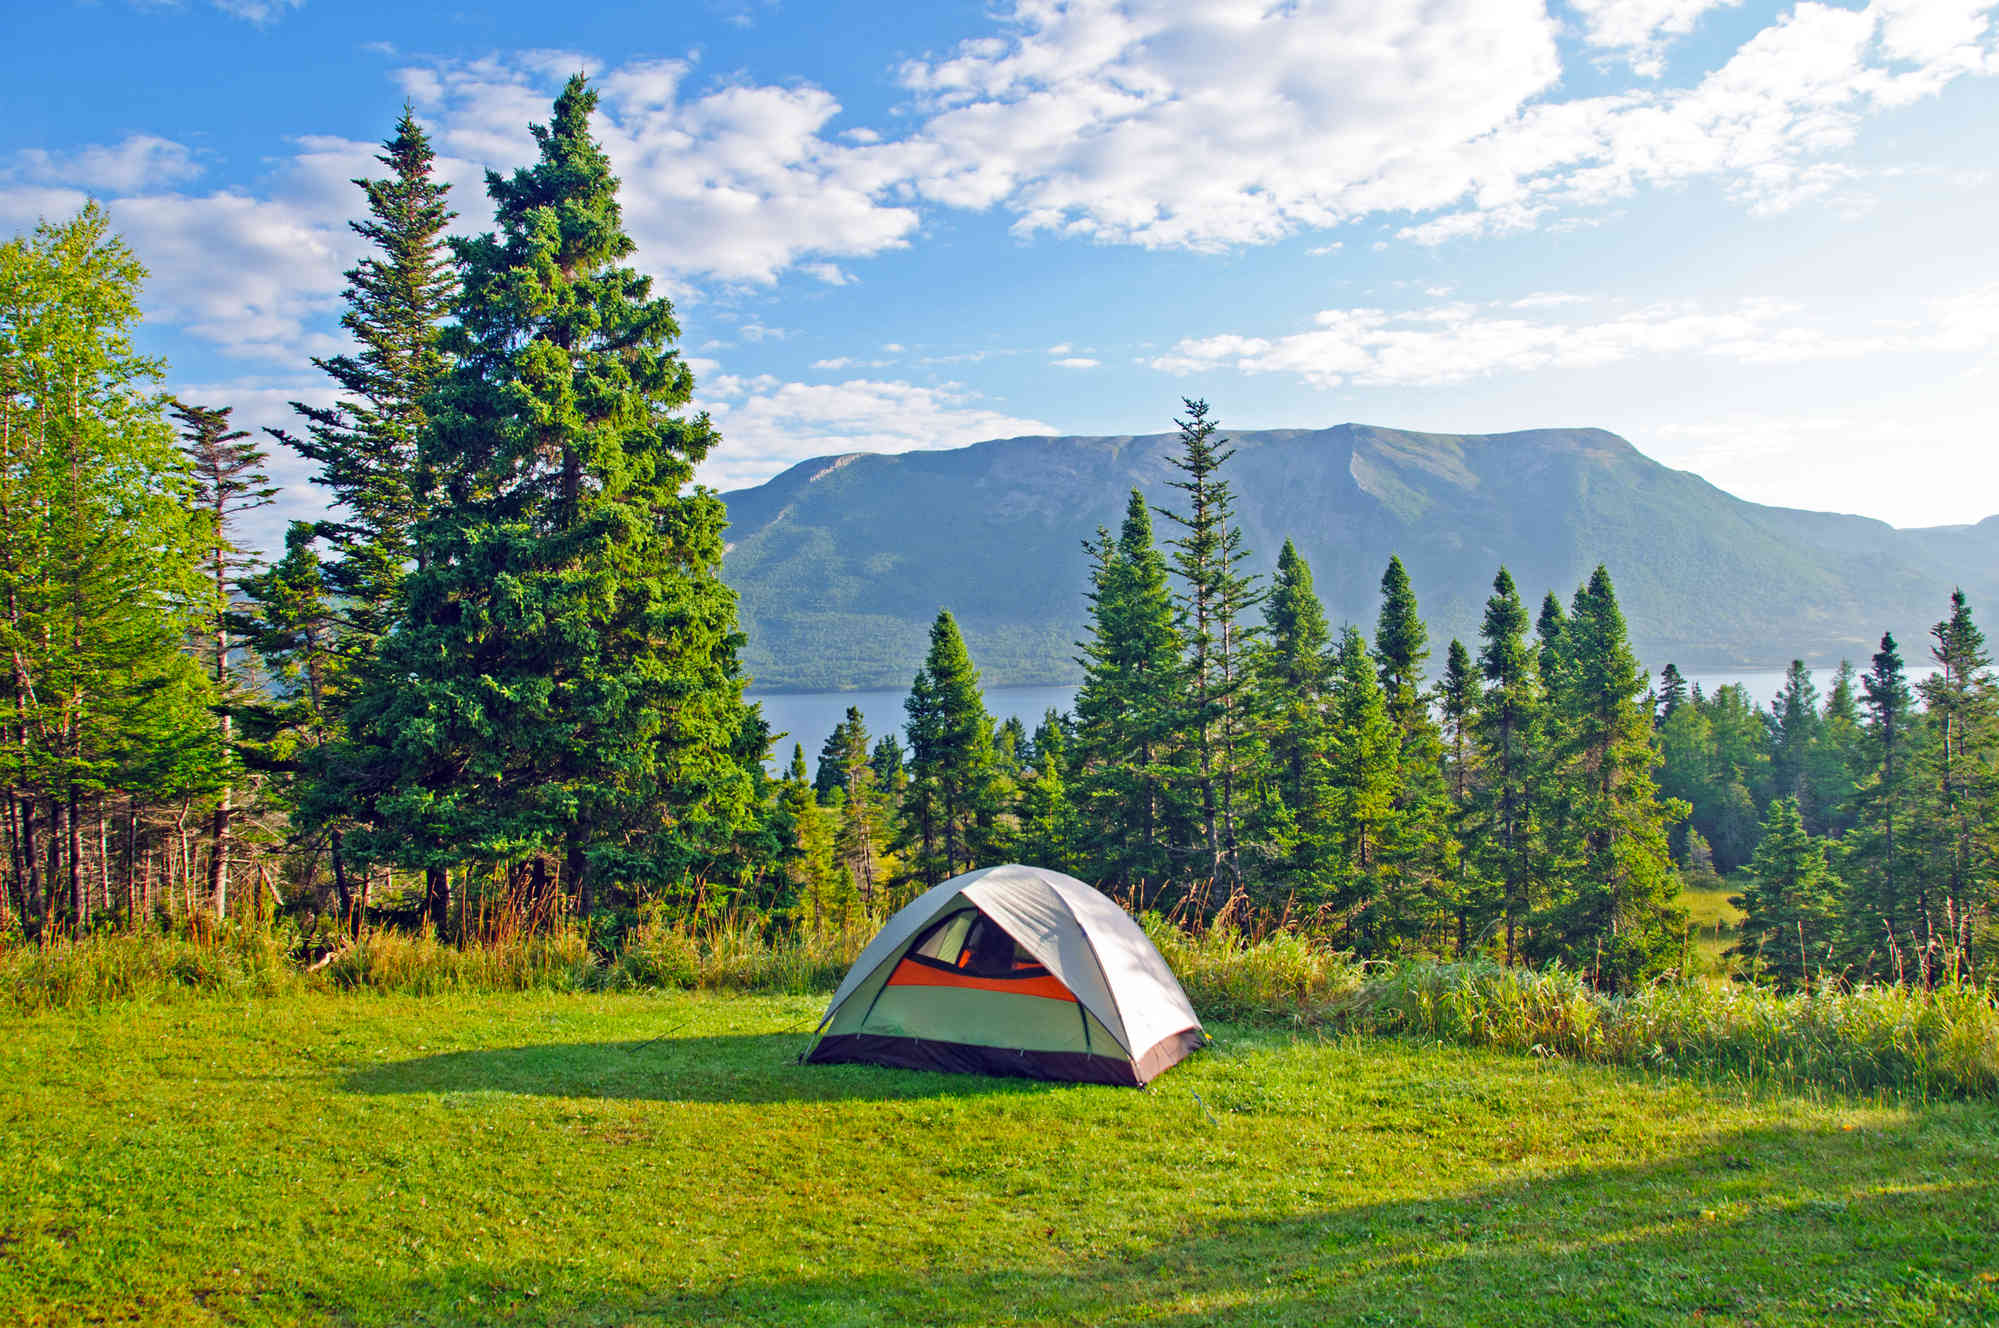 Countries that allow wild camping